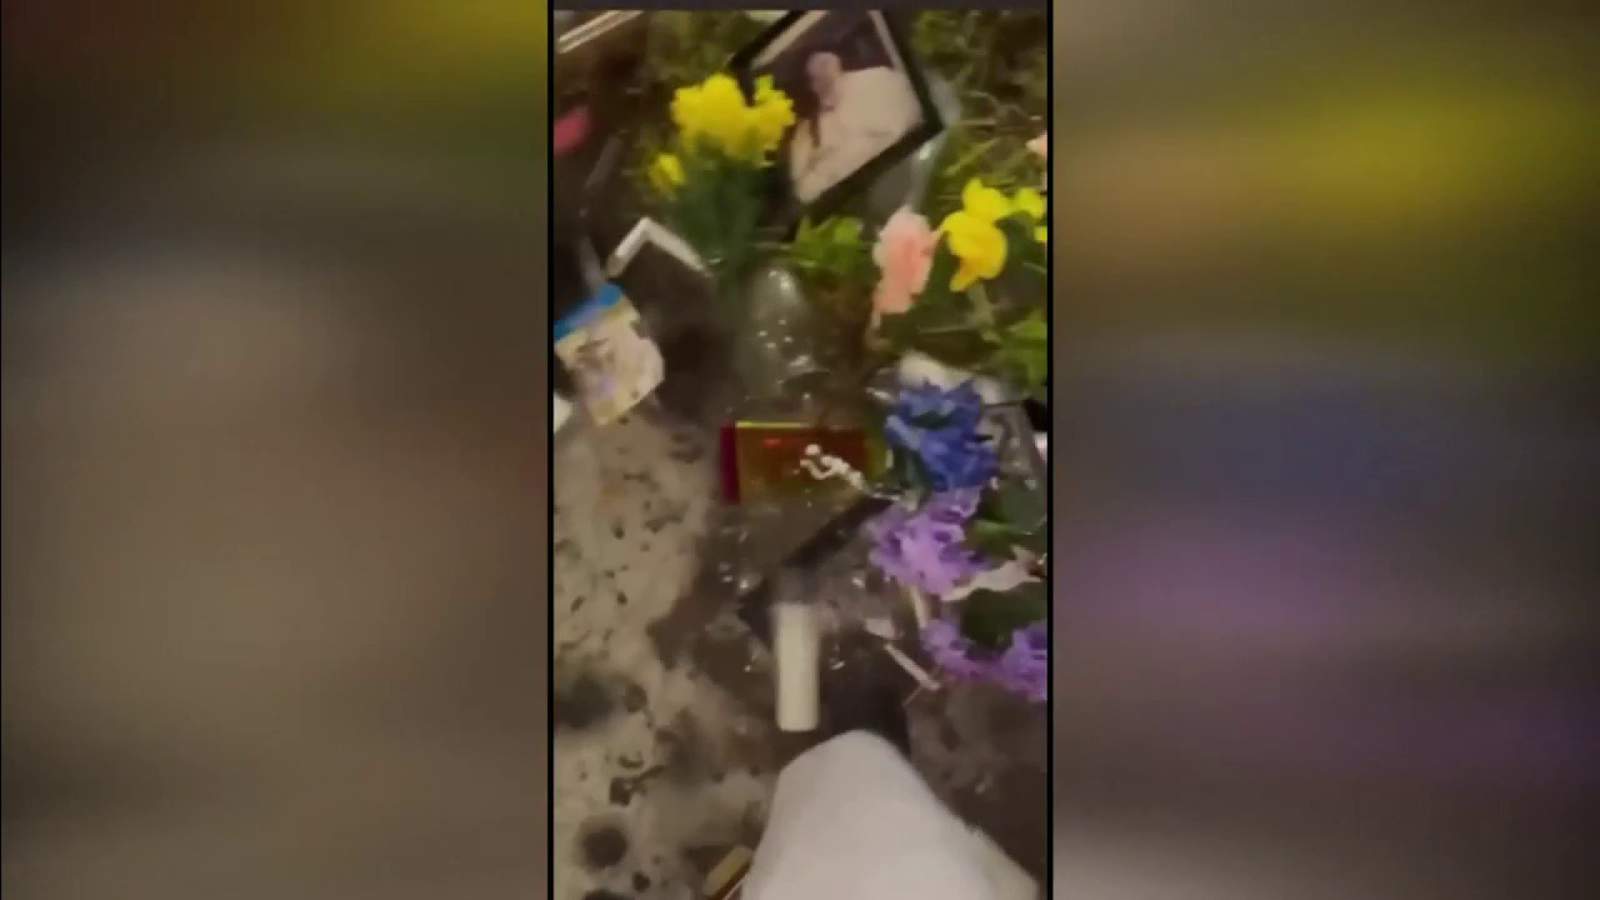 Social media post shows person destroying and urinating on memorial for New Year’s Day crash victims